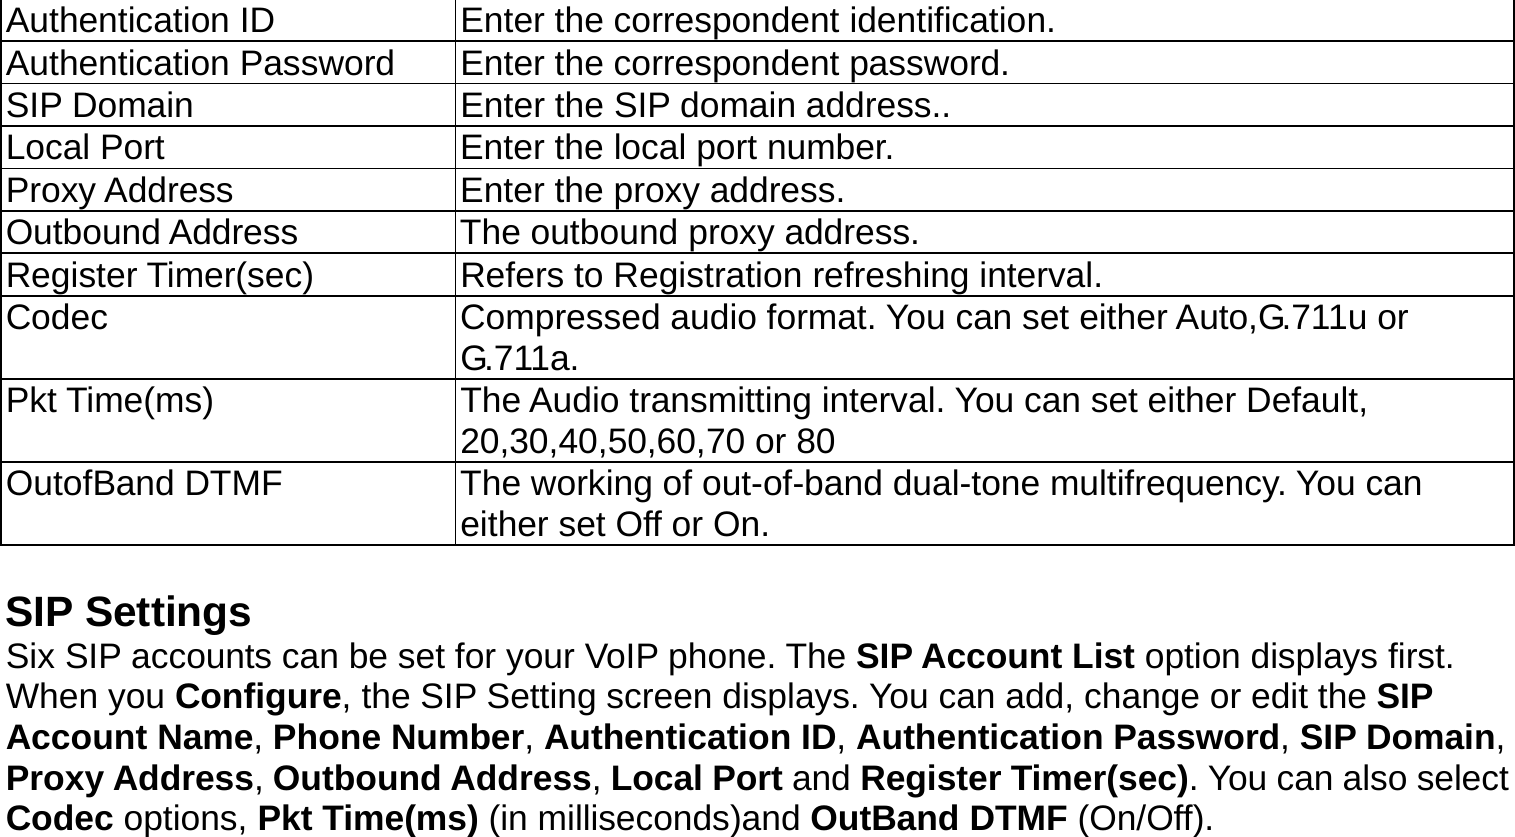 Authentication ID  Enter the correspondent identification. Authentication Password  Enter the correspondent password. SIP Domain  Enter the SIP domain address.. Local Port  Enter the local port number. Proxy Address  Enter the proxy address. Outbound Address  The outbound proxy address. Register Timer(sec)  Refers to Registration refreshing interval. Codec  Compressed audio format. You can set either Auto,G.711u or G.711a. Pkt Time(ms)  The Audio transmitting interval. You can set either Default, 20,30,40,50,60,70 or 80 OutofBand DTMF  The working of out-of-band dual-tone multifrequency. You can either set Off or On.  SIP Settings Six SIP accounts can be set for your VoIP phone. The SIP Account List option displays first. When you Configure, the SIP Setting screen displays. You can add, change or edit the SIP Account Name, Phone Number, Authentication ID, Authentication Password, SIP Domain, Proxy Address, Outbound Address, Local Port and Register Timer(sec). You can also select Codec options, Pkt Time(ms) (in milliseconds)and OutBand DTMF (On/Off). 